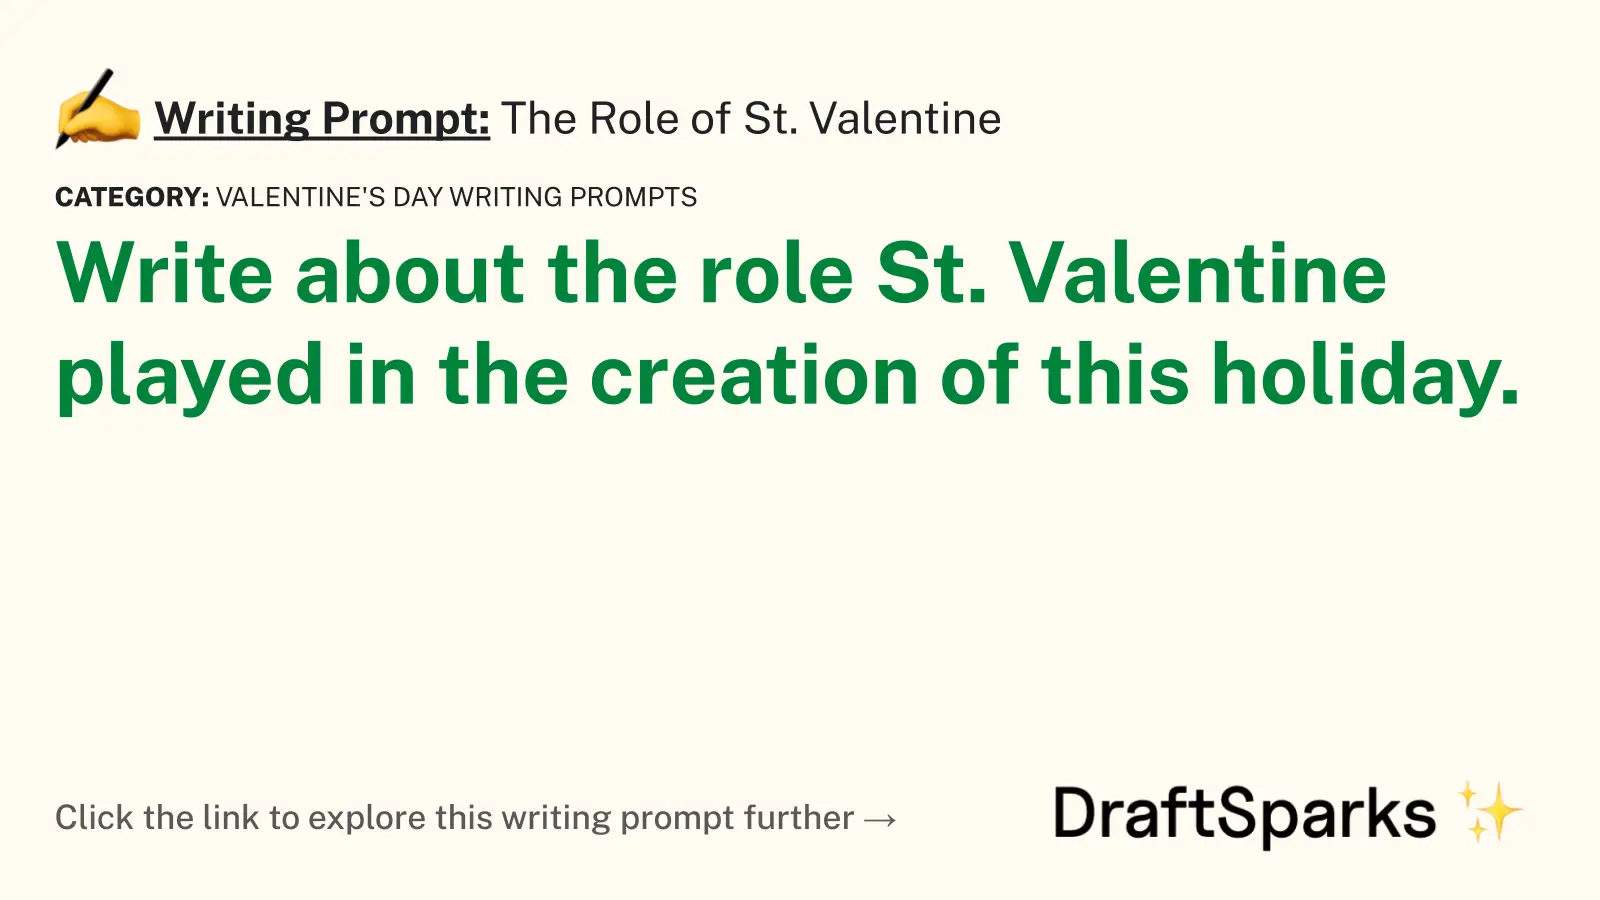 The Role of St. Valentine